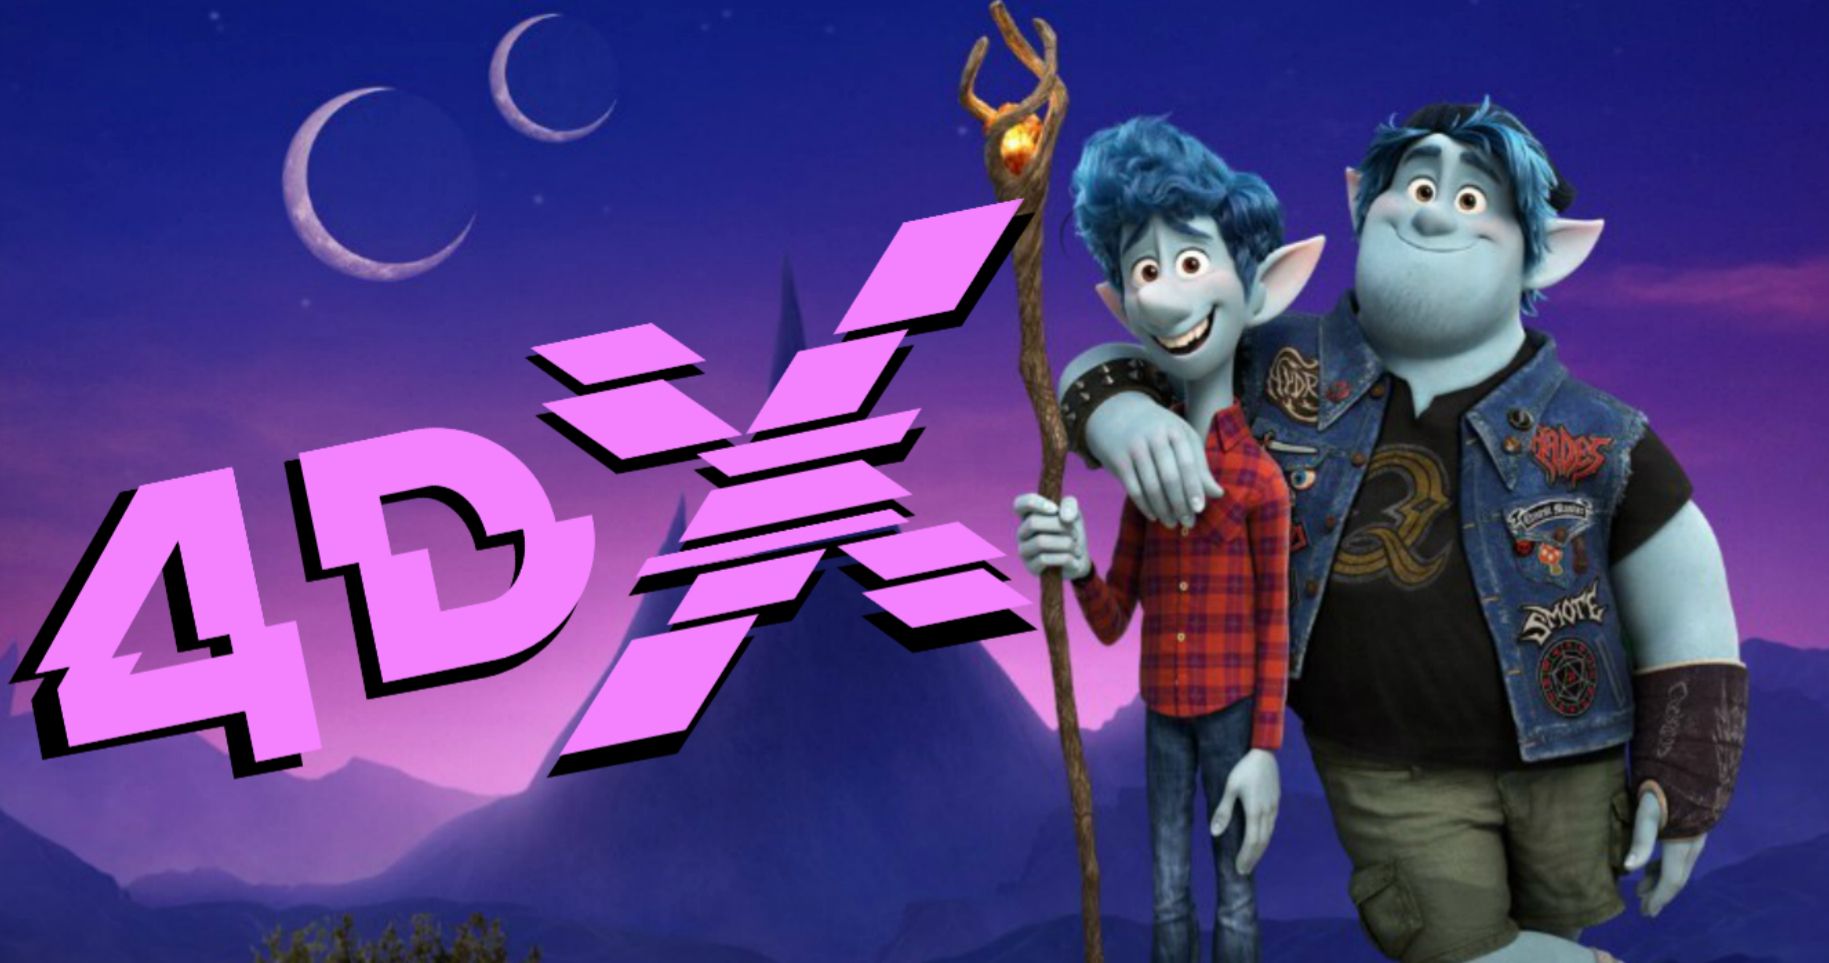 Onward 4DX Review: Pixar Delivers One Rollicking Road Trip